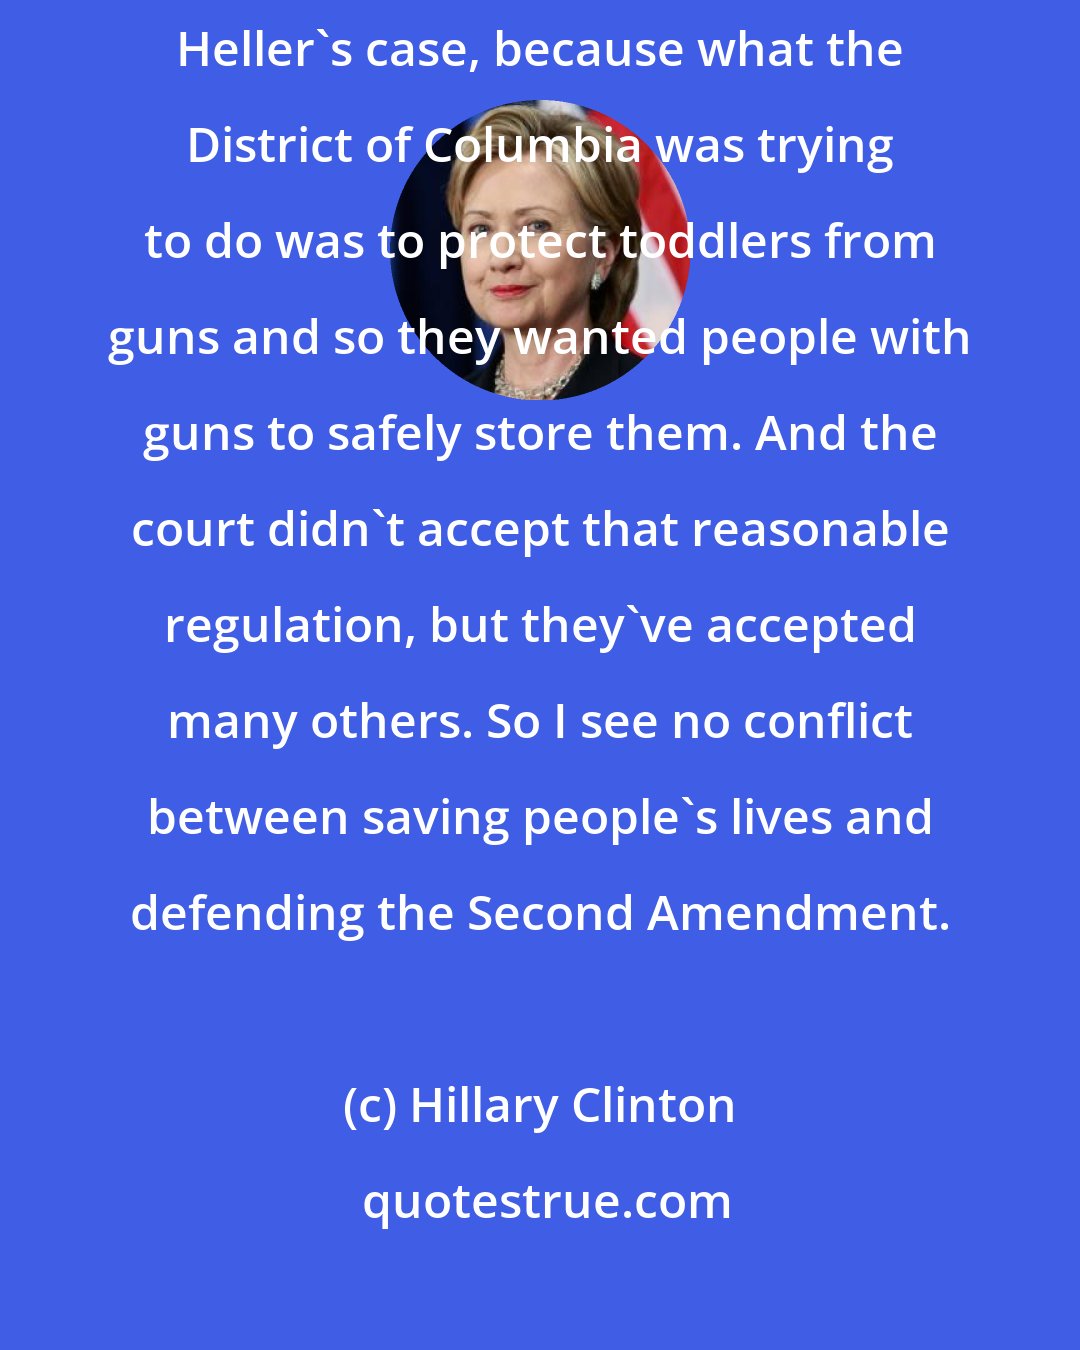 Hillary Clinton: I disagreed with the way the court applied the Second Amendment in Heller's case, because what the District of Columbia was trying to do was to protect toddlers from guns and so they wanted people with guns to safely store them. And the court didn't accept that reasonable regulation, but they've accepted many others. So I see no conflict between saving people's lives and defending the Second Amendment.